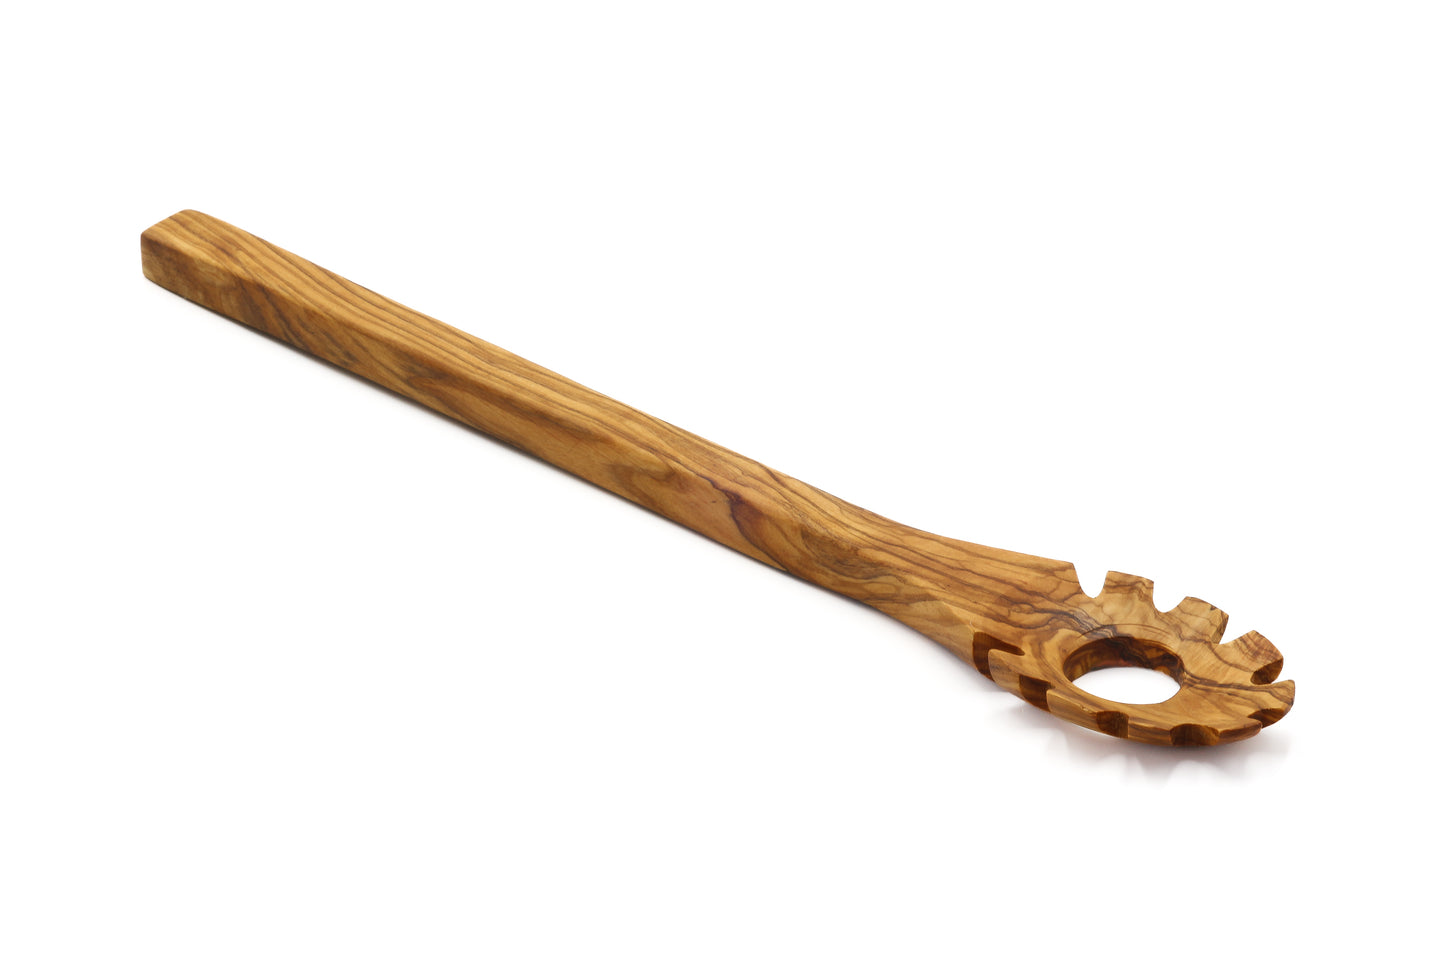 Hand-finished olive wood spaghetti scoop with a hook